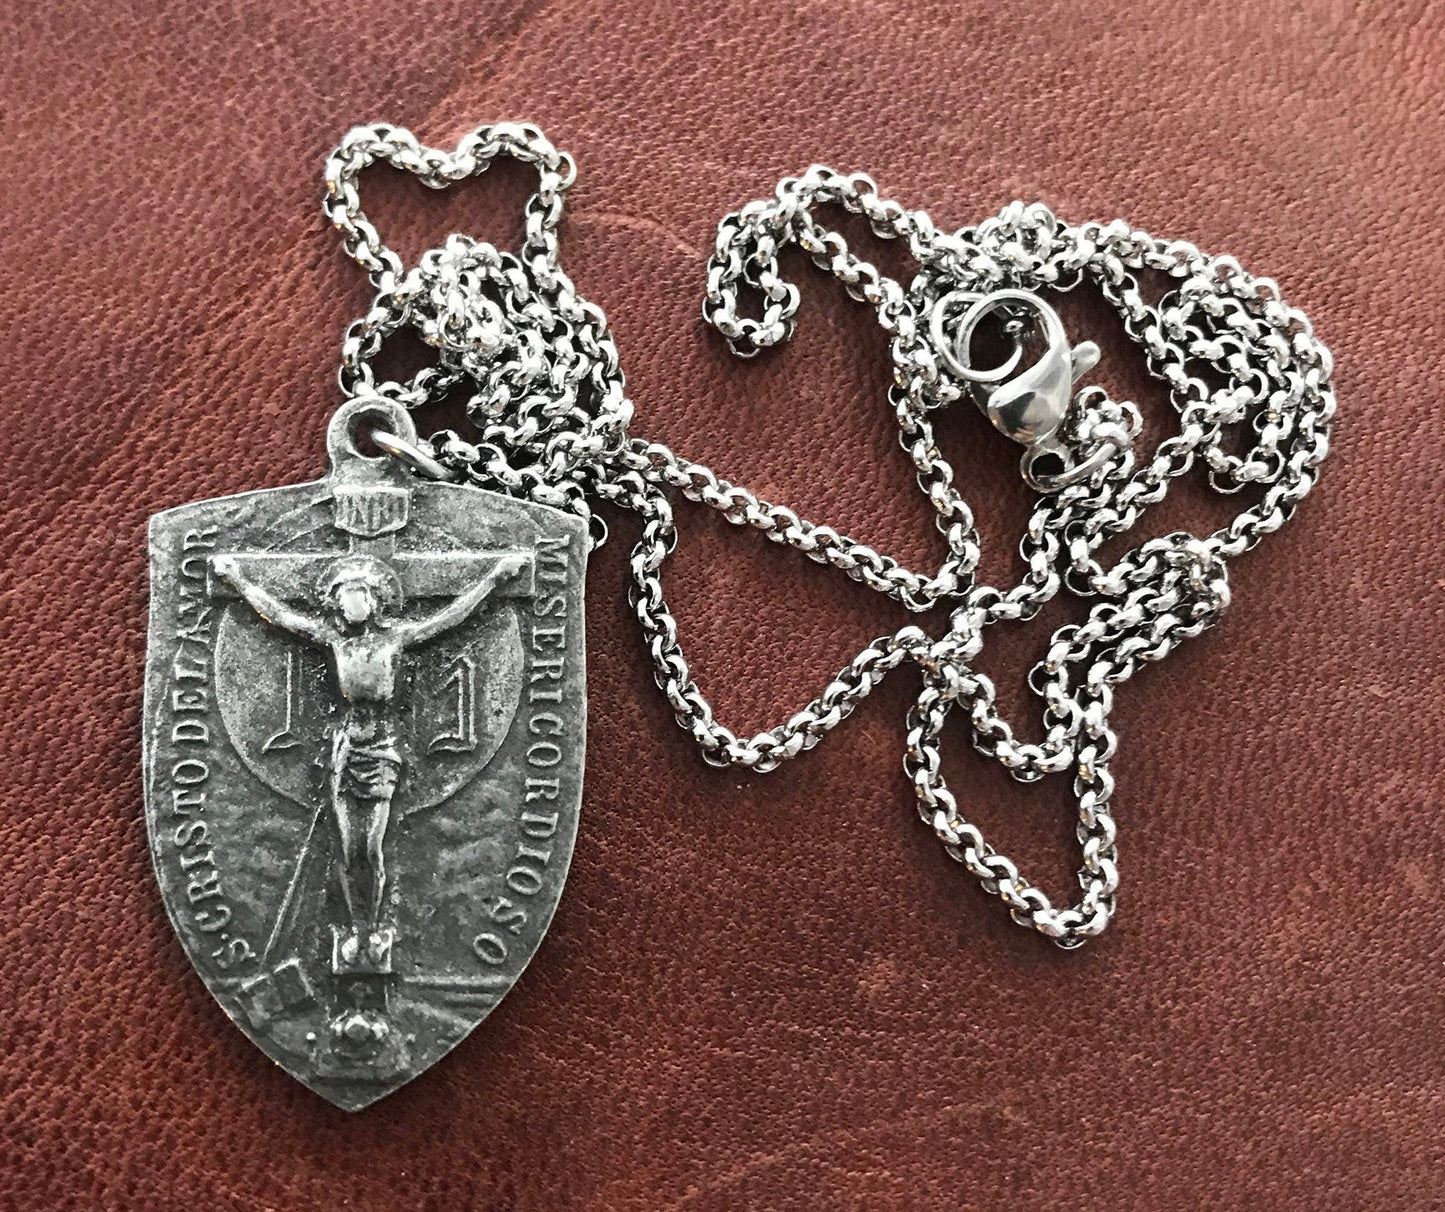 Men's Necklace featuring a Crucifix Shield and Blessed Mother Mary, Unisex Necklace, Catholic Pendant 20 or 24 inch Chain, ST-023